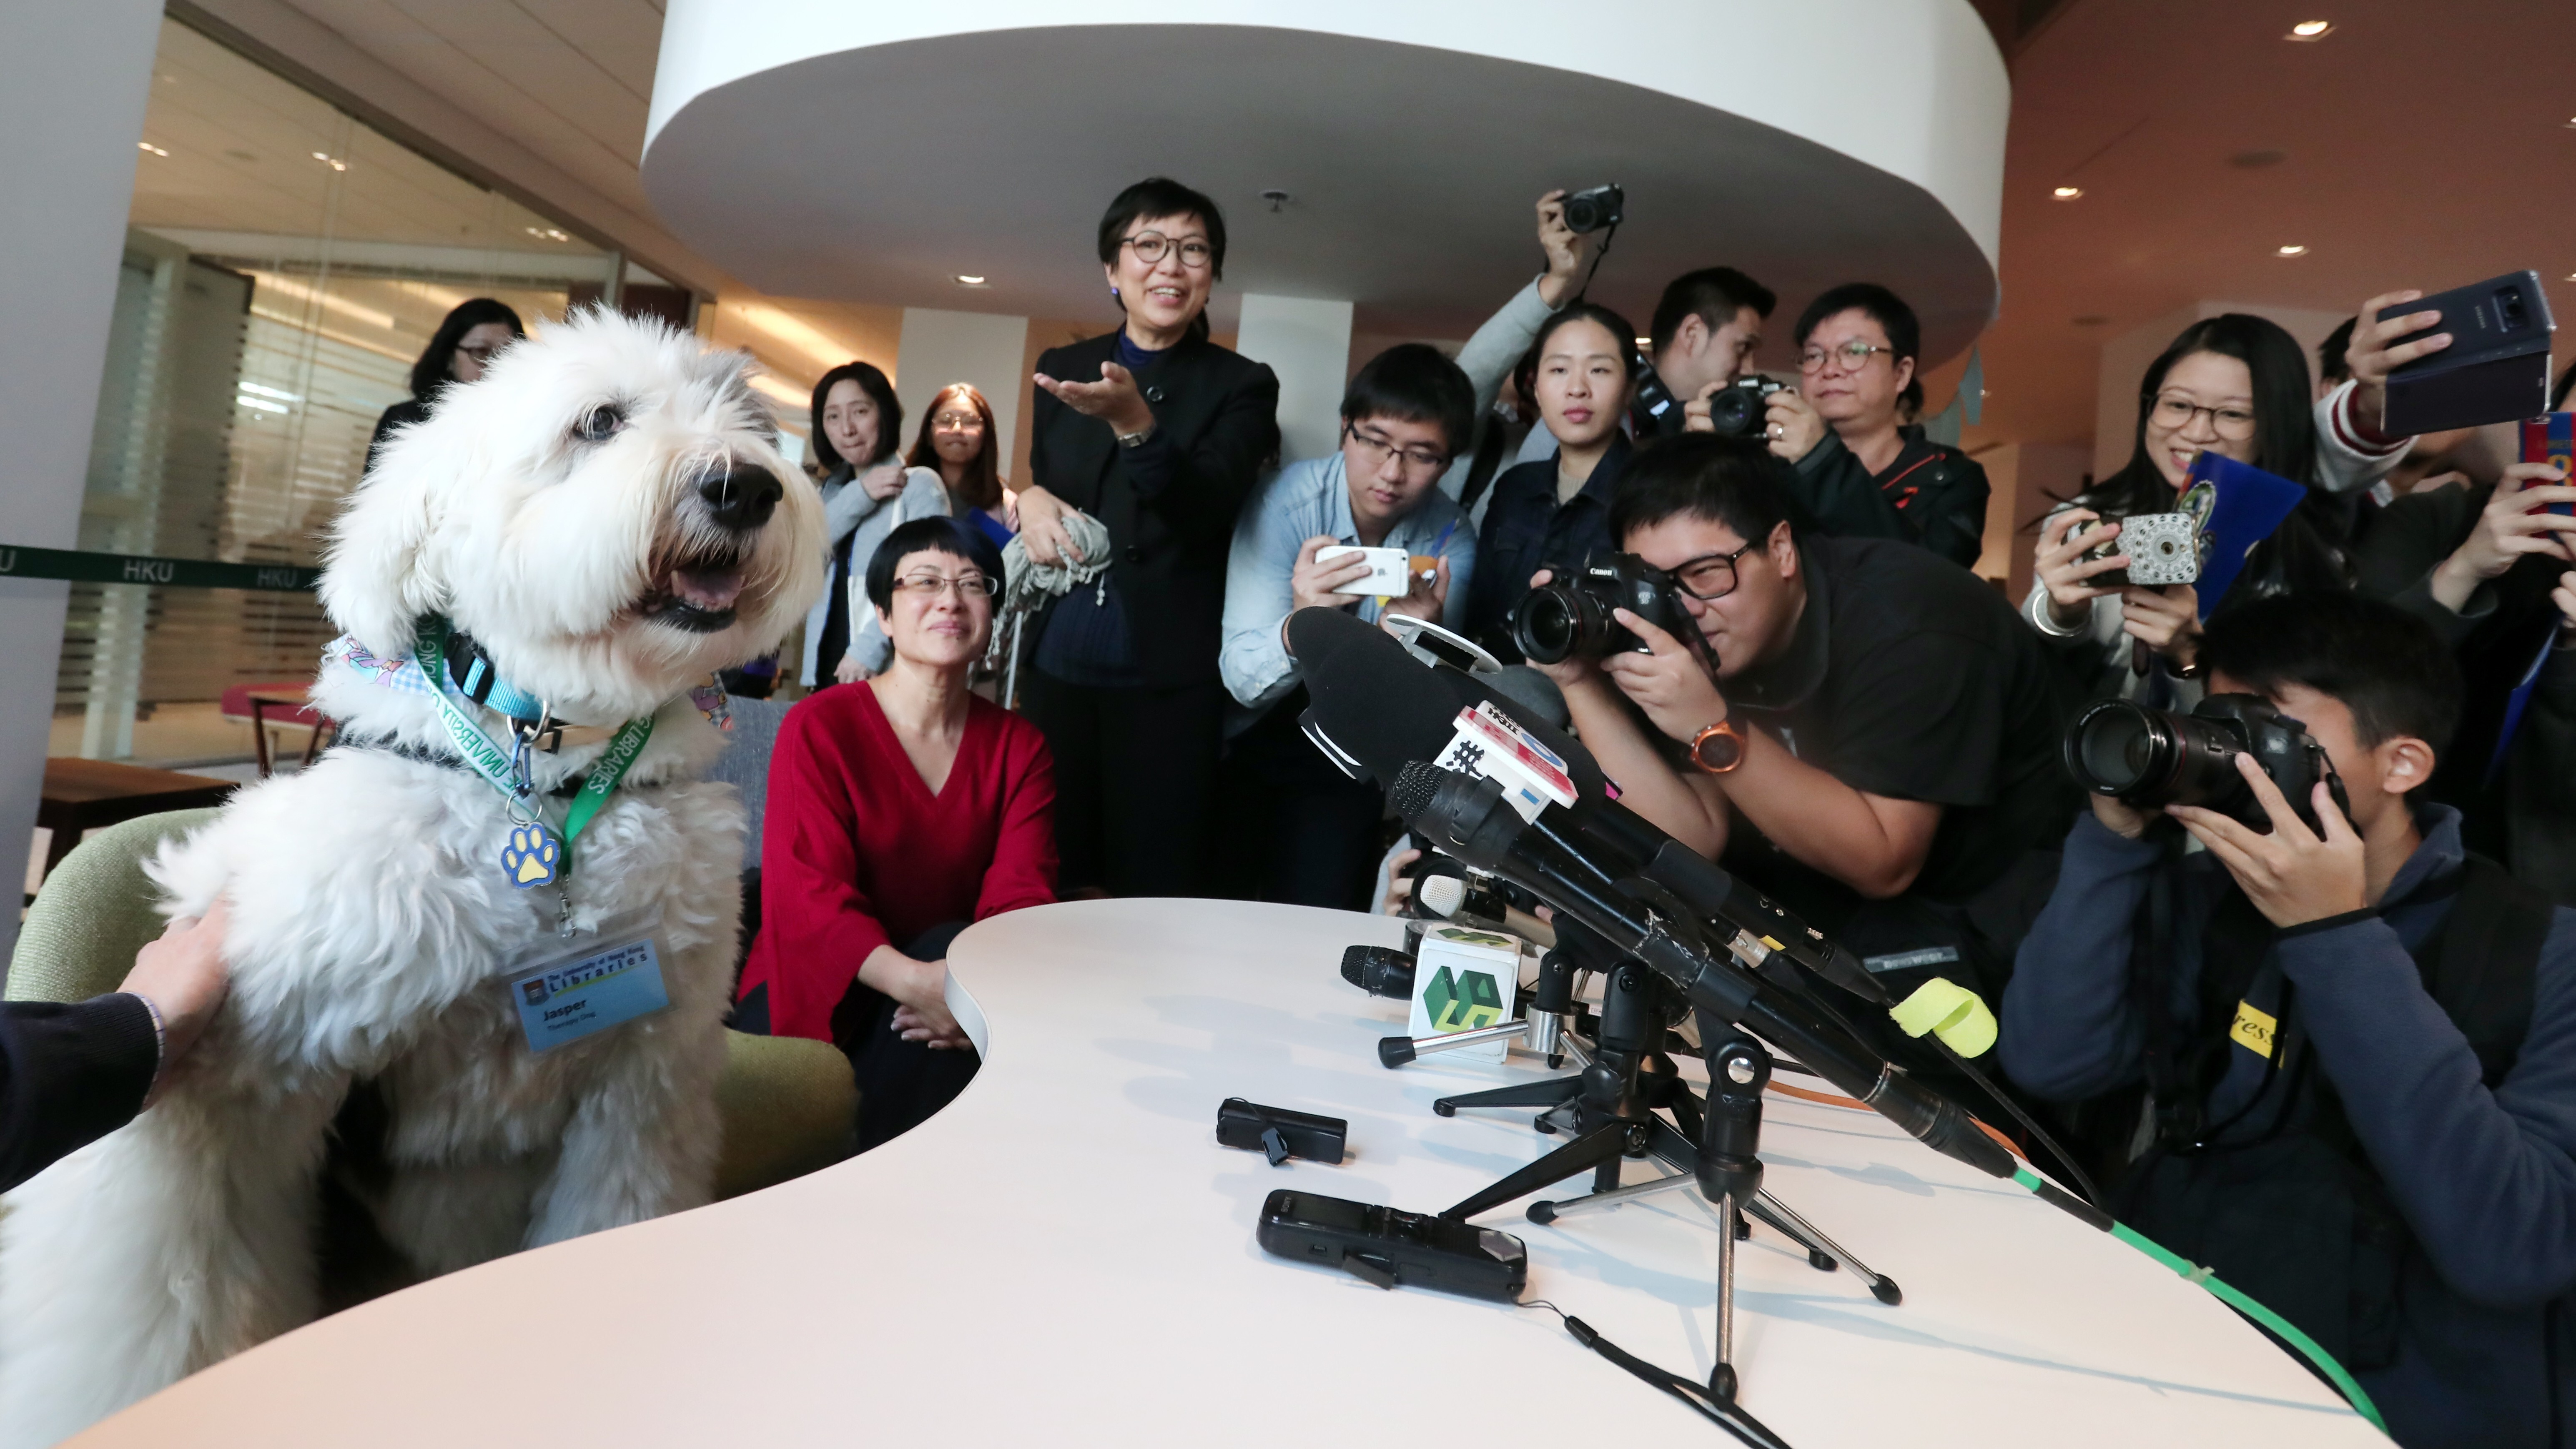 Jasper brought smiles to many faces during his time at HKU. Photo: SCMP/ Jonathan Wong